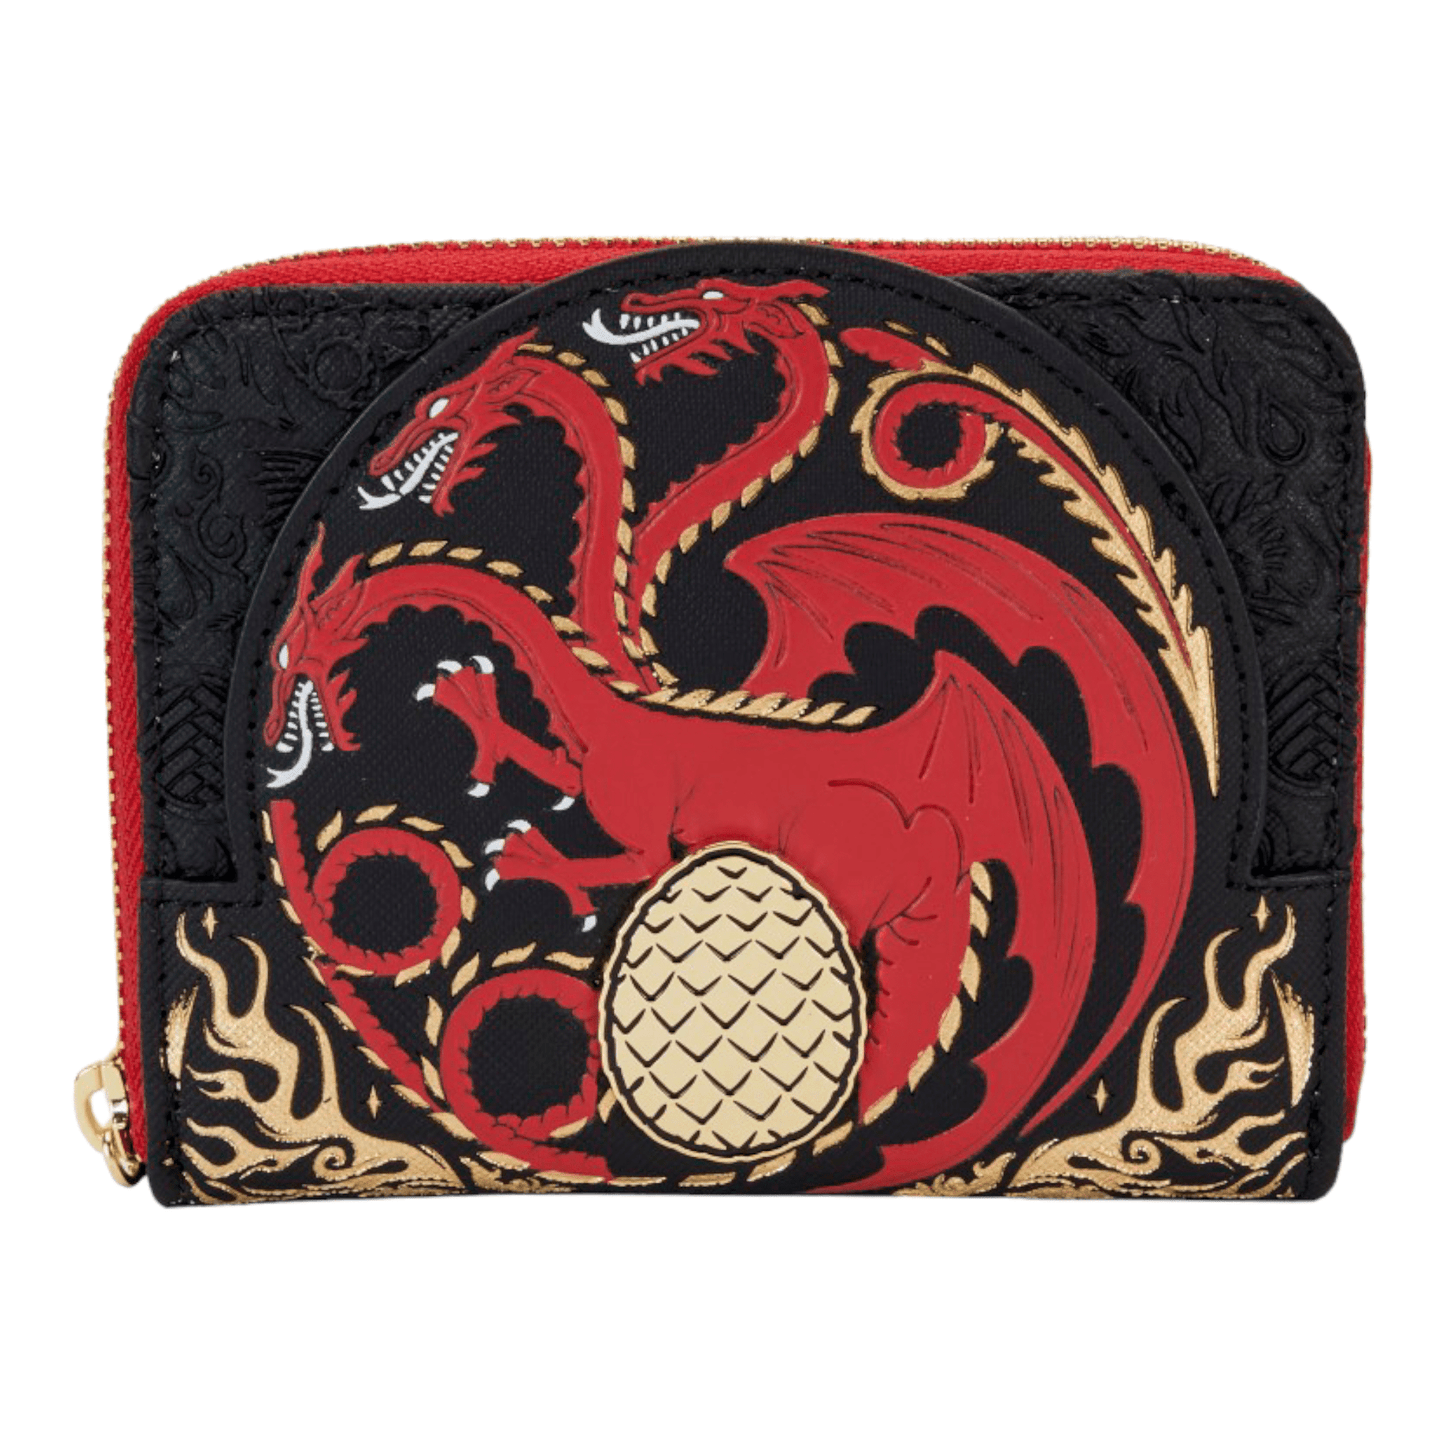 Portefeuille - Targaryen - House Of The Dragon - Loungefly J'M T Créa